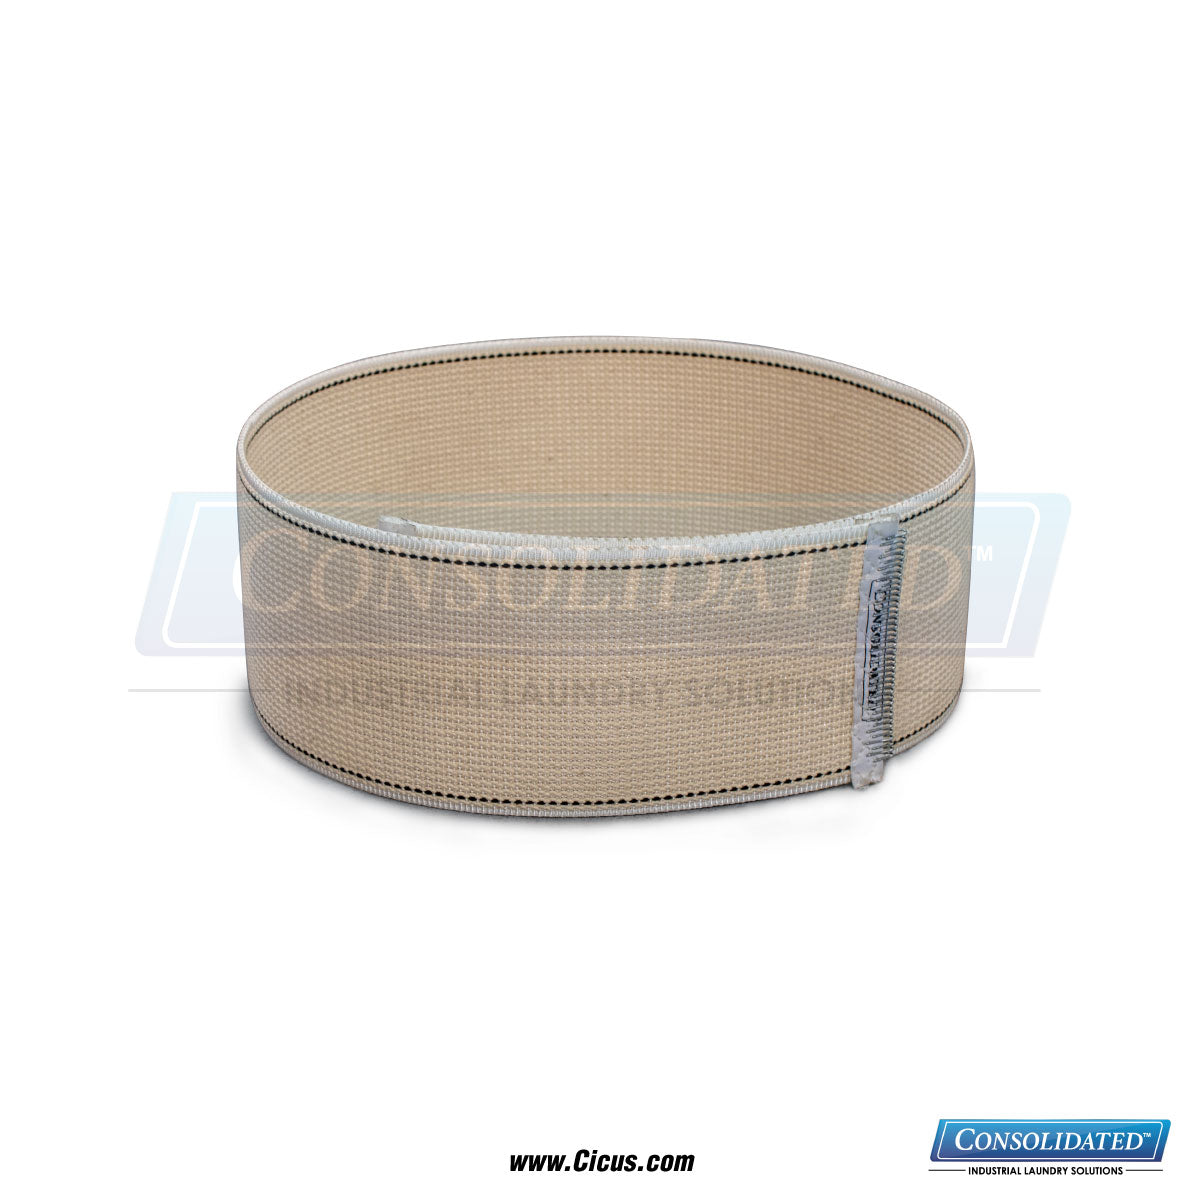 CIC Exclusive Chicago Dryer Canvas Ribbon - 2" x 111" (1001-006)